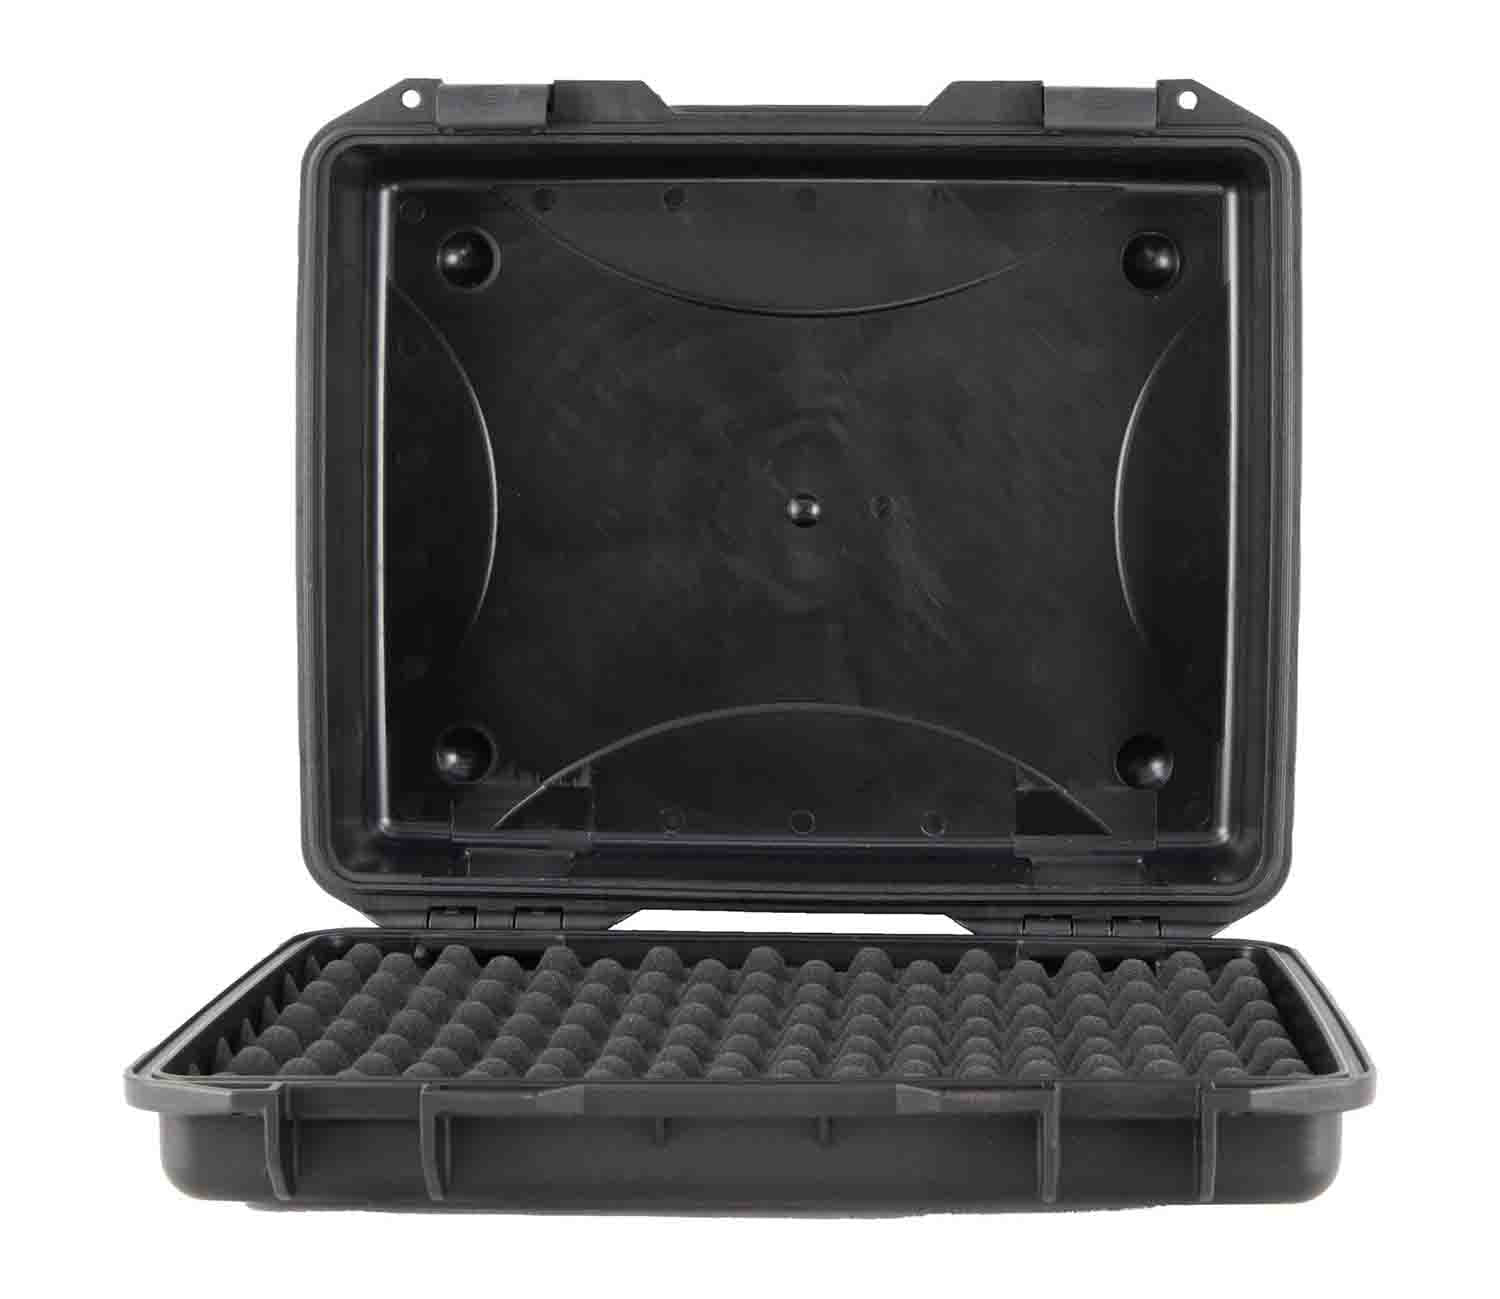 Odyssey VU161305NF Vulcan Injection-Molded Utility Case - 17 x 13.25 x 3.75" Interior - Hollywood DJ